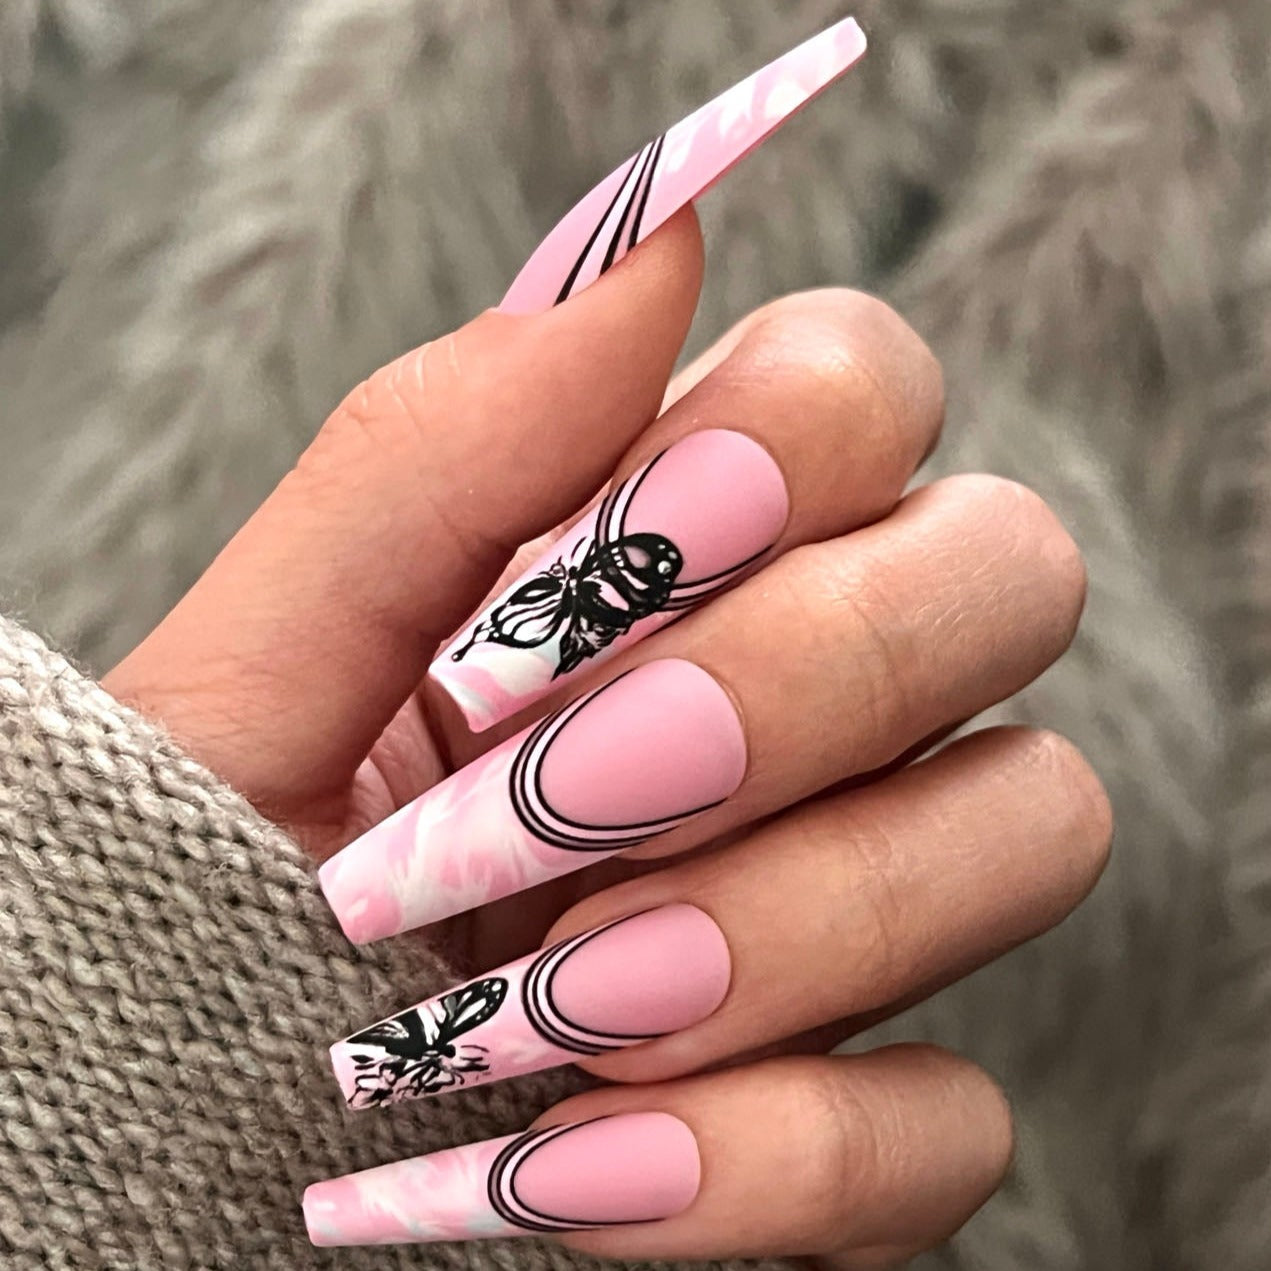 PRETTY IN PINK COFFIN SHAPE PRESS ON NAILS